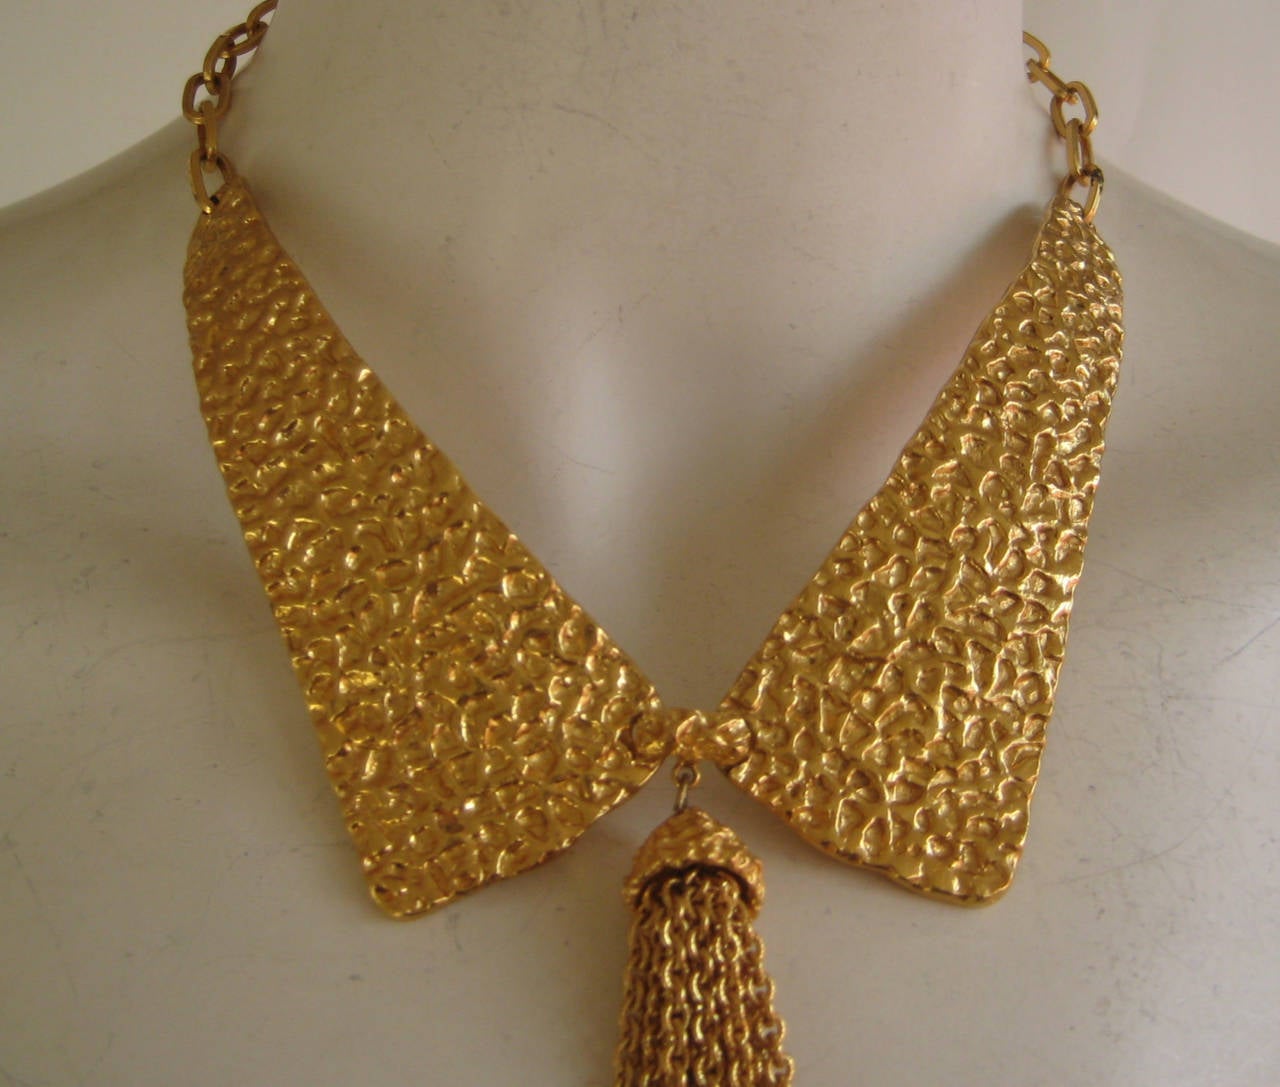 Bold gold tone statement necklace with two metal plates attached to gold link chain.Long chain fringe at the center front .Excellent condition with no signs of wear.Necklace is signed Trifari  on the hook clasp.Each plaque measures 4